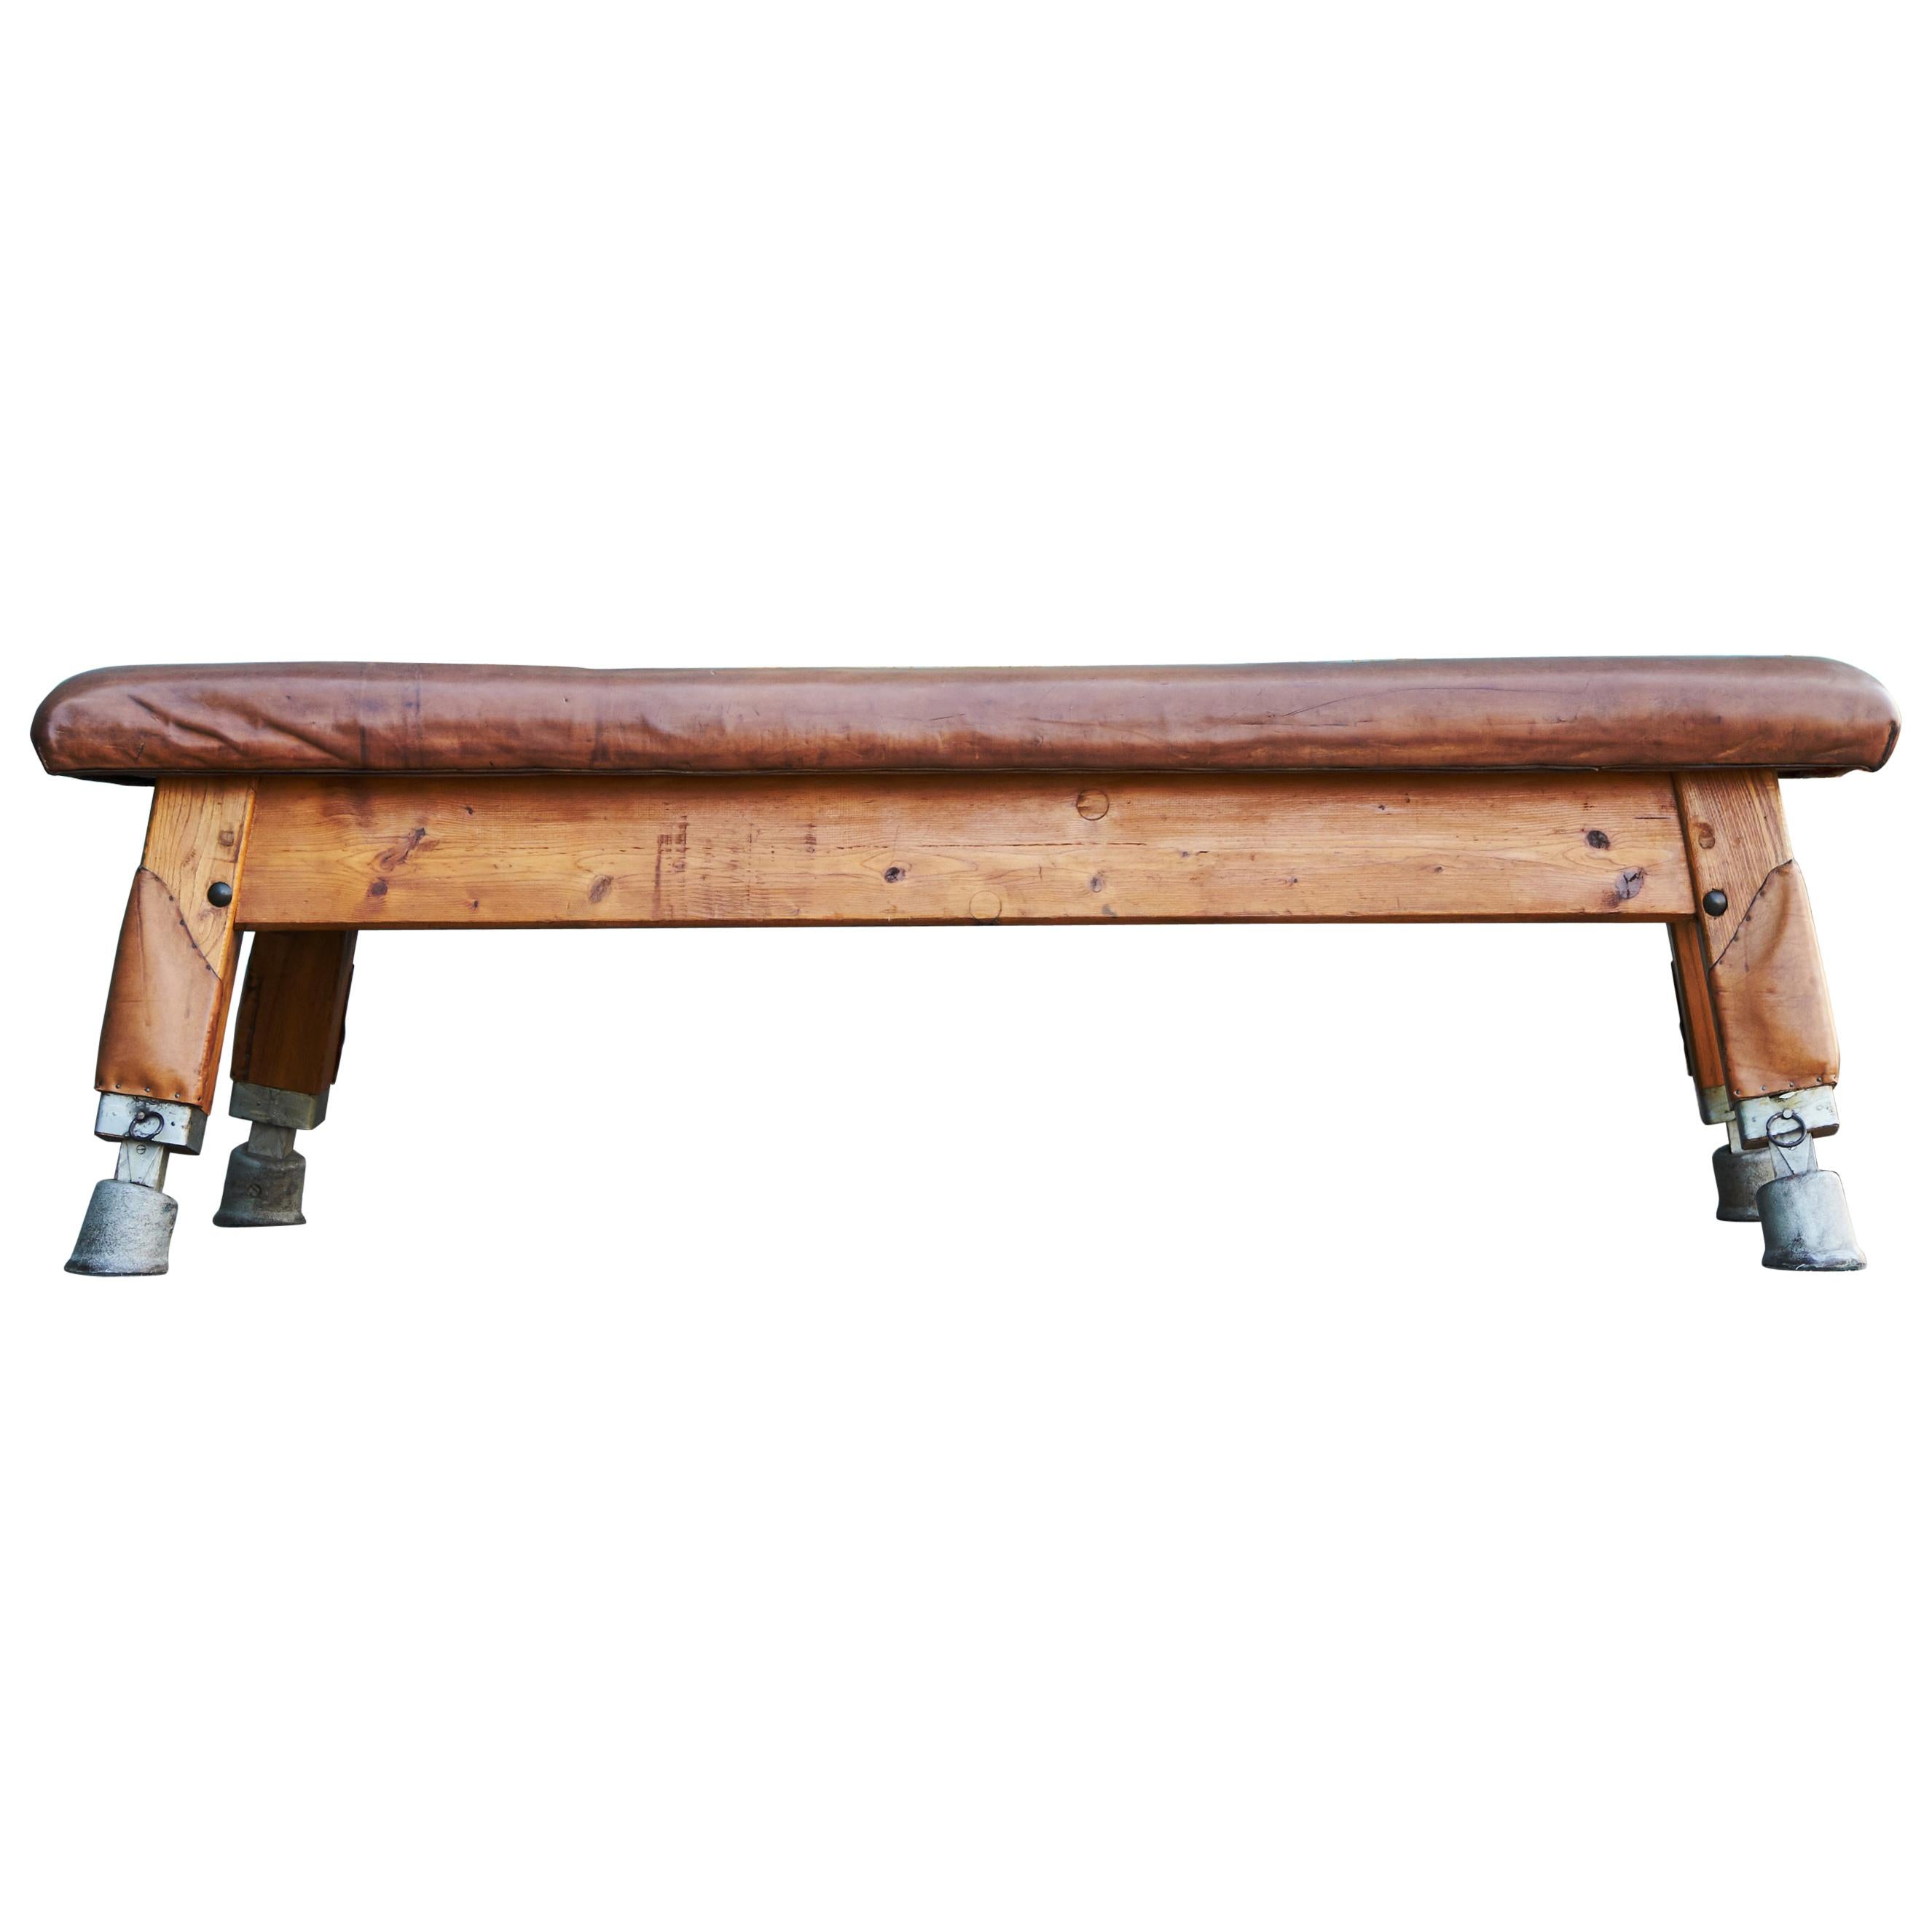 Large Gymnastics Leather Bench Table 1930s, Exclusive For Sale